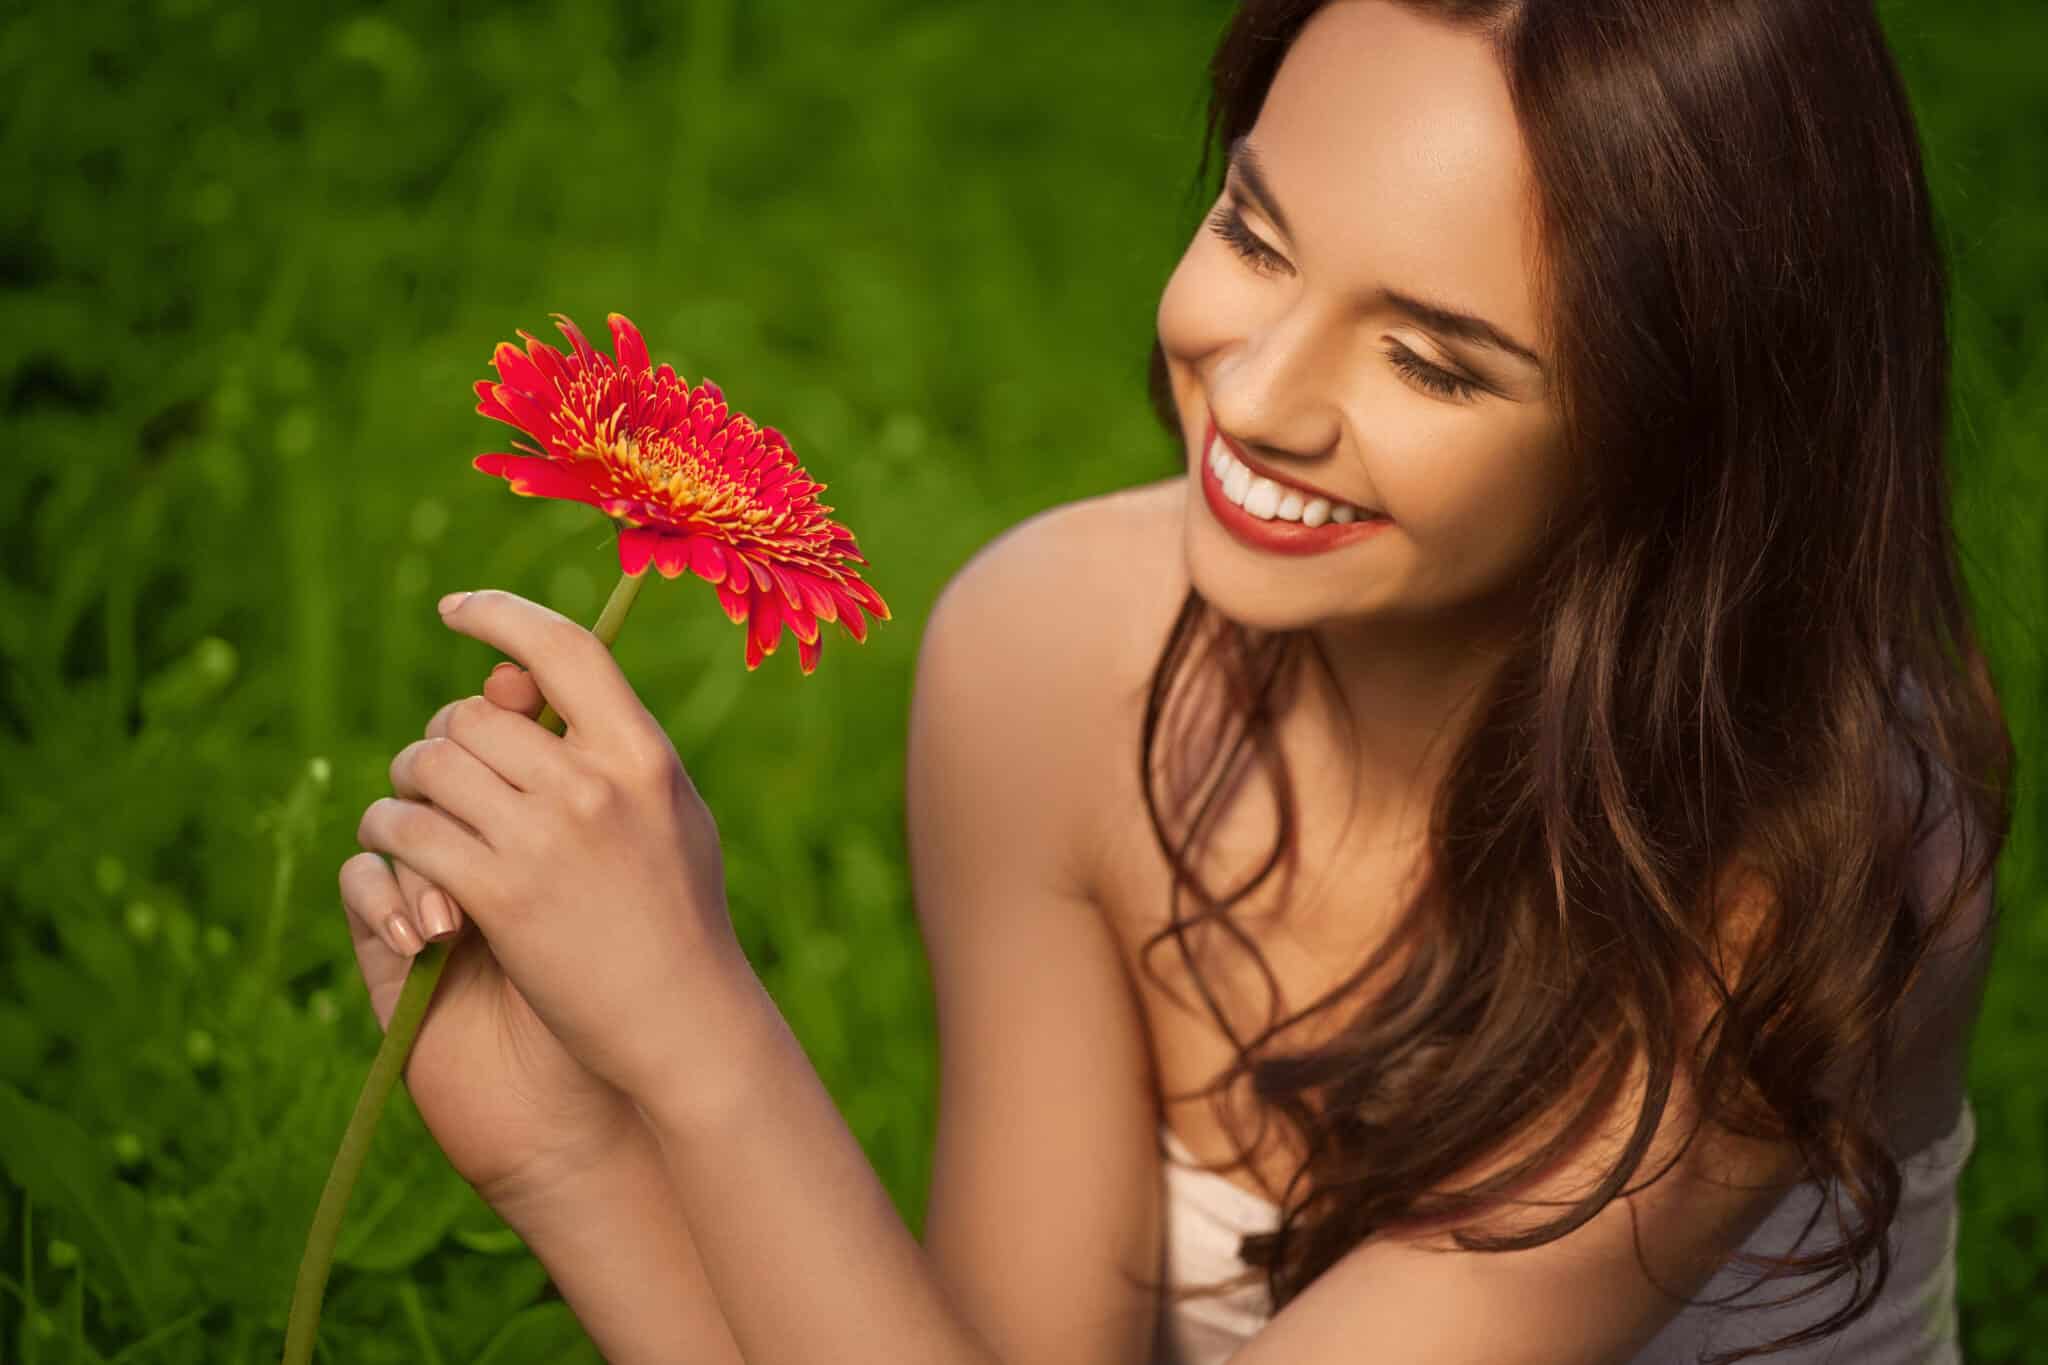 pretty and happy young woman holding a red daisy enjoying nature